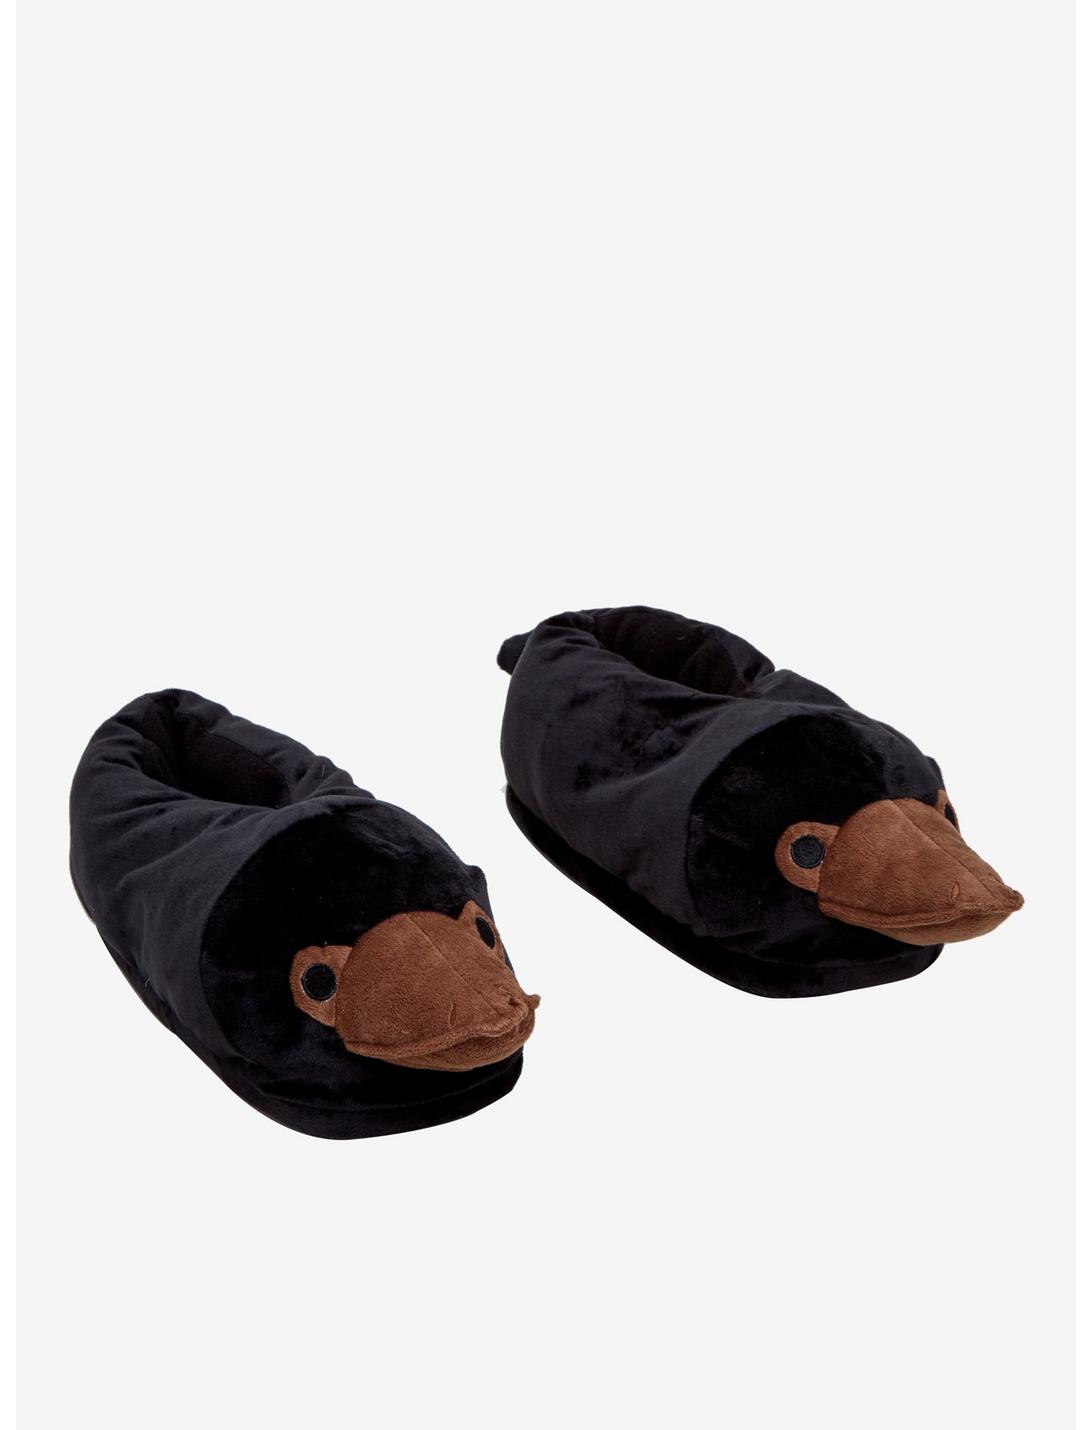 Fantastic Beasts: The Crimes of Grindelwald Niffler Cozy Slippers, BROWN, hi-res